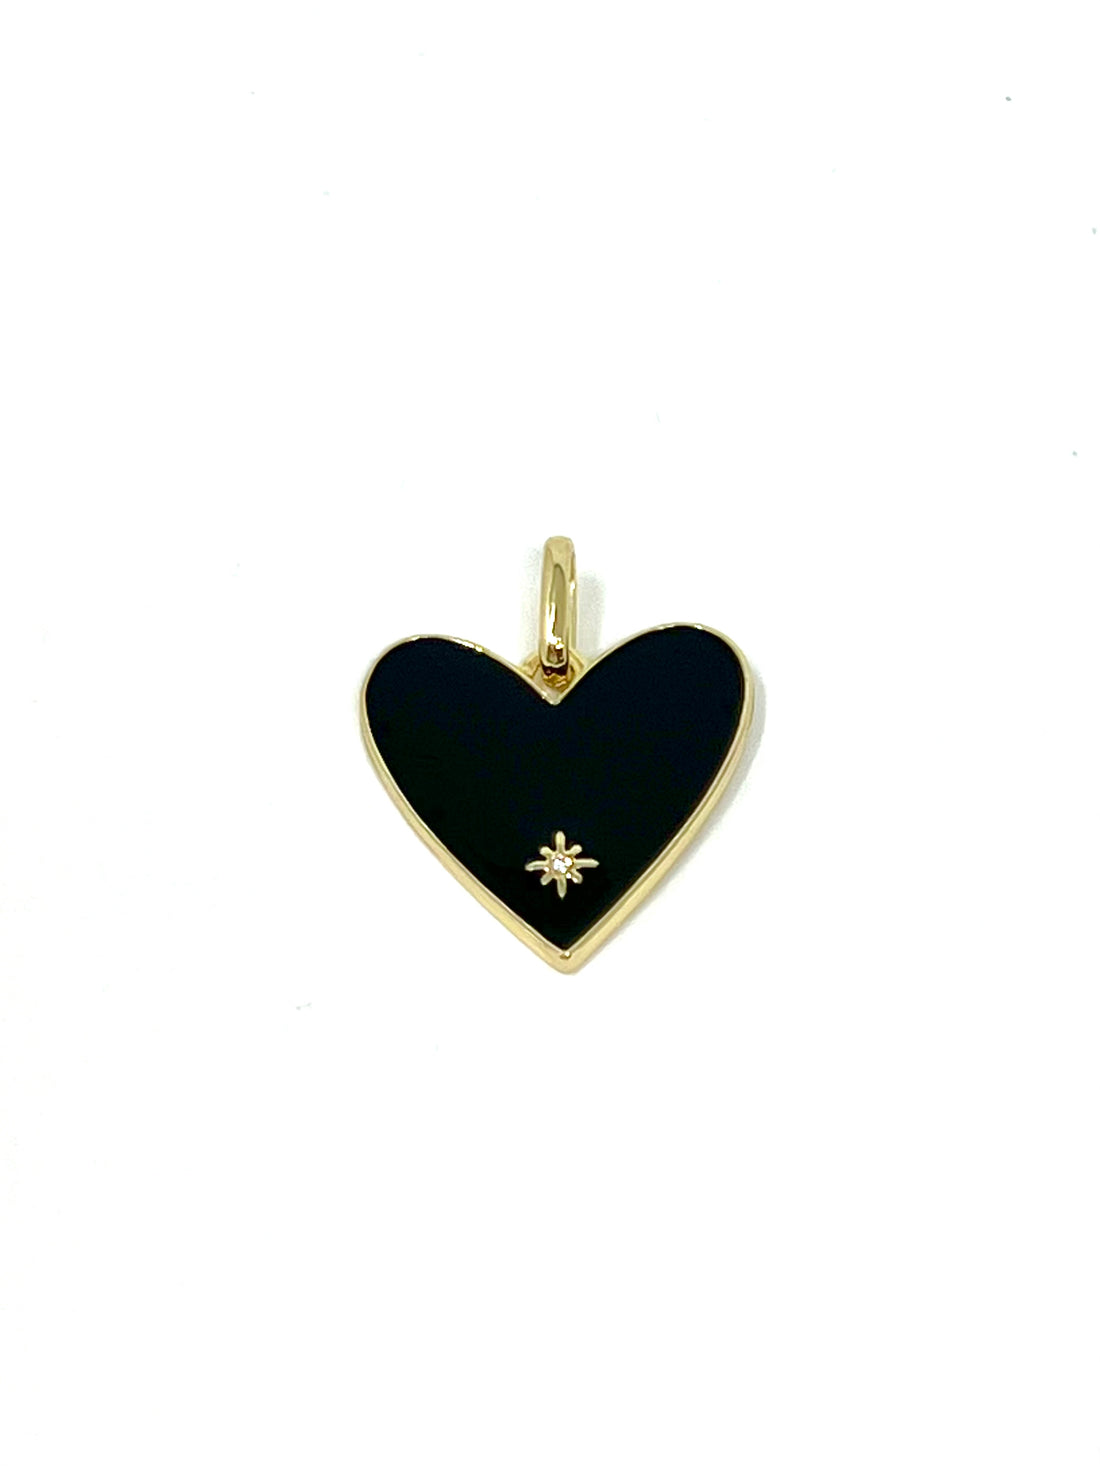 Charming Enamel Heart with Stone Charm in Black